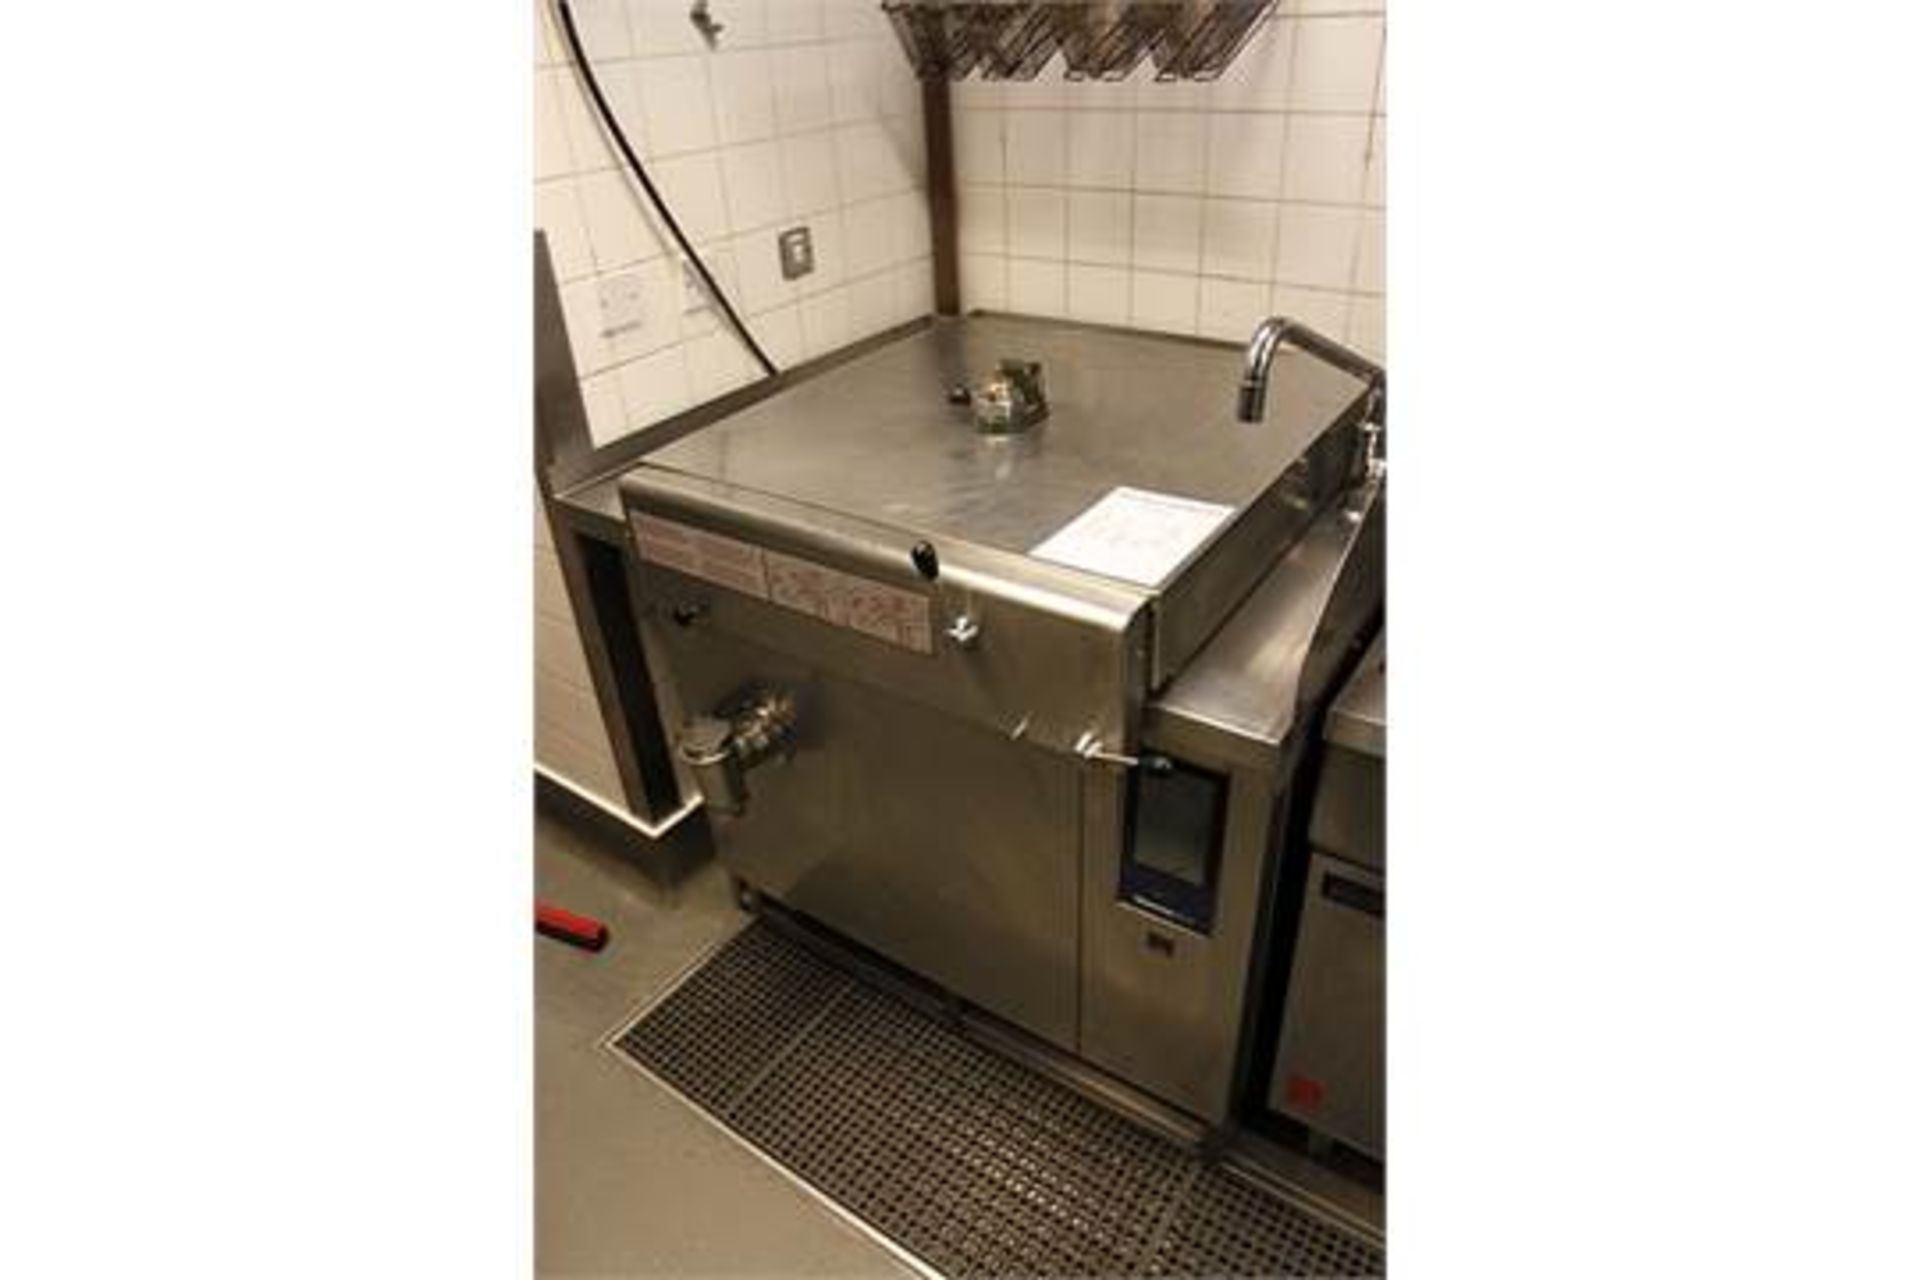 Electrolux Thermaline pressure boiling kettle pan Sze 680mm x 550mm x 340mm